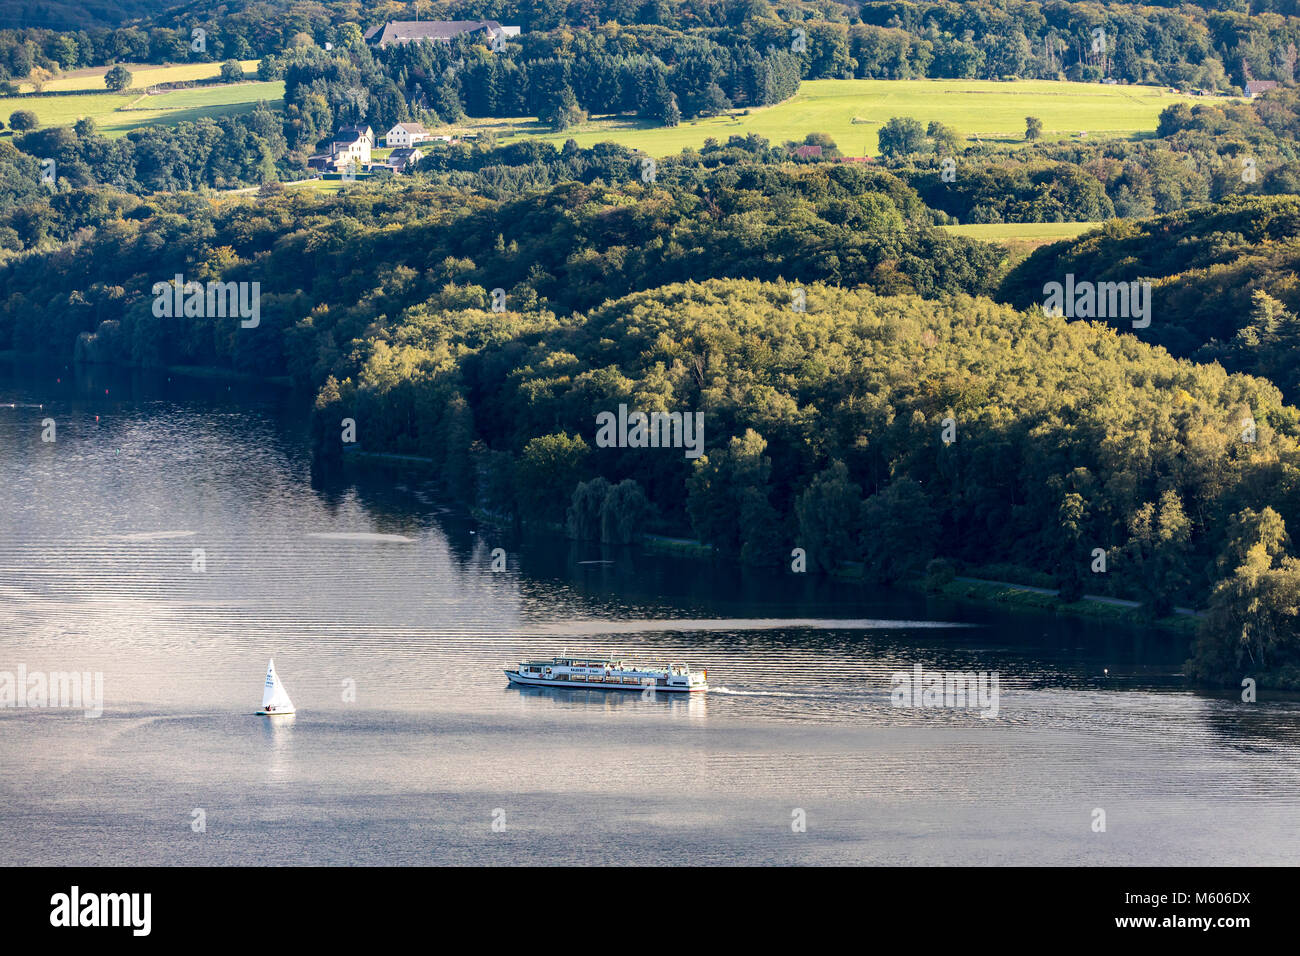 The Baldeneysee Lake, a reservoir of river Ruhr, in Essen, Germany, sailing boats, sightseeing river boat, Stock Photo